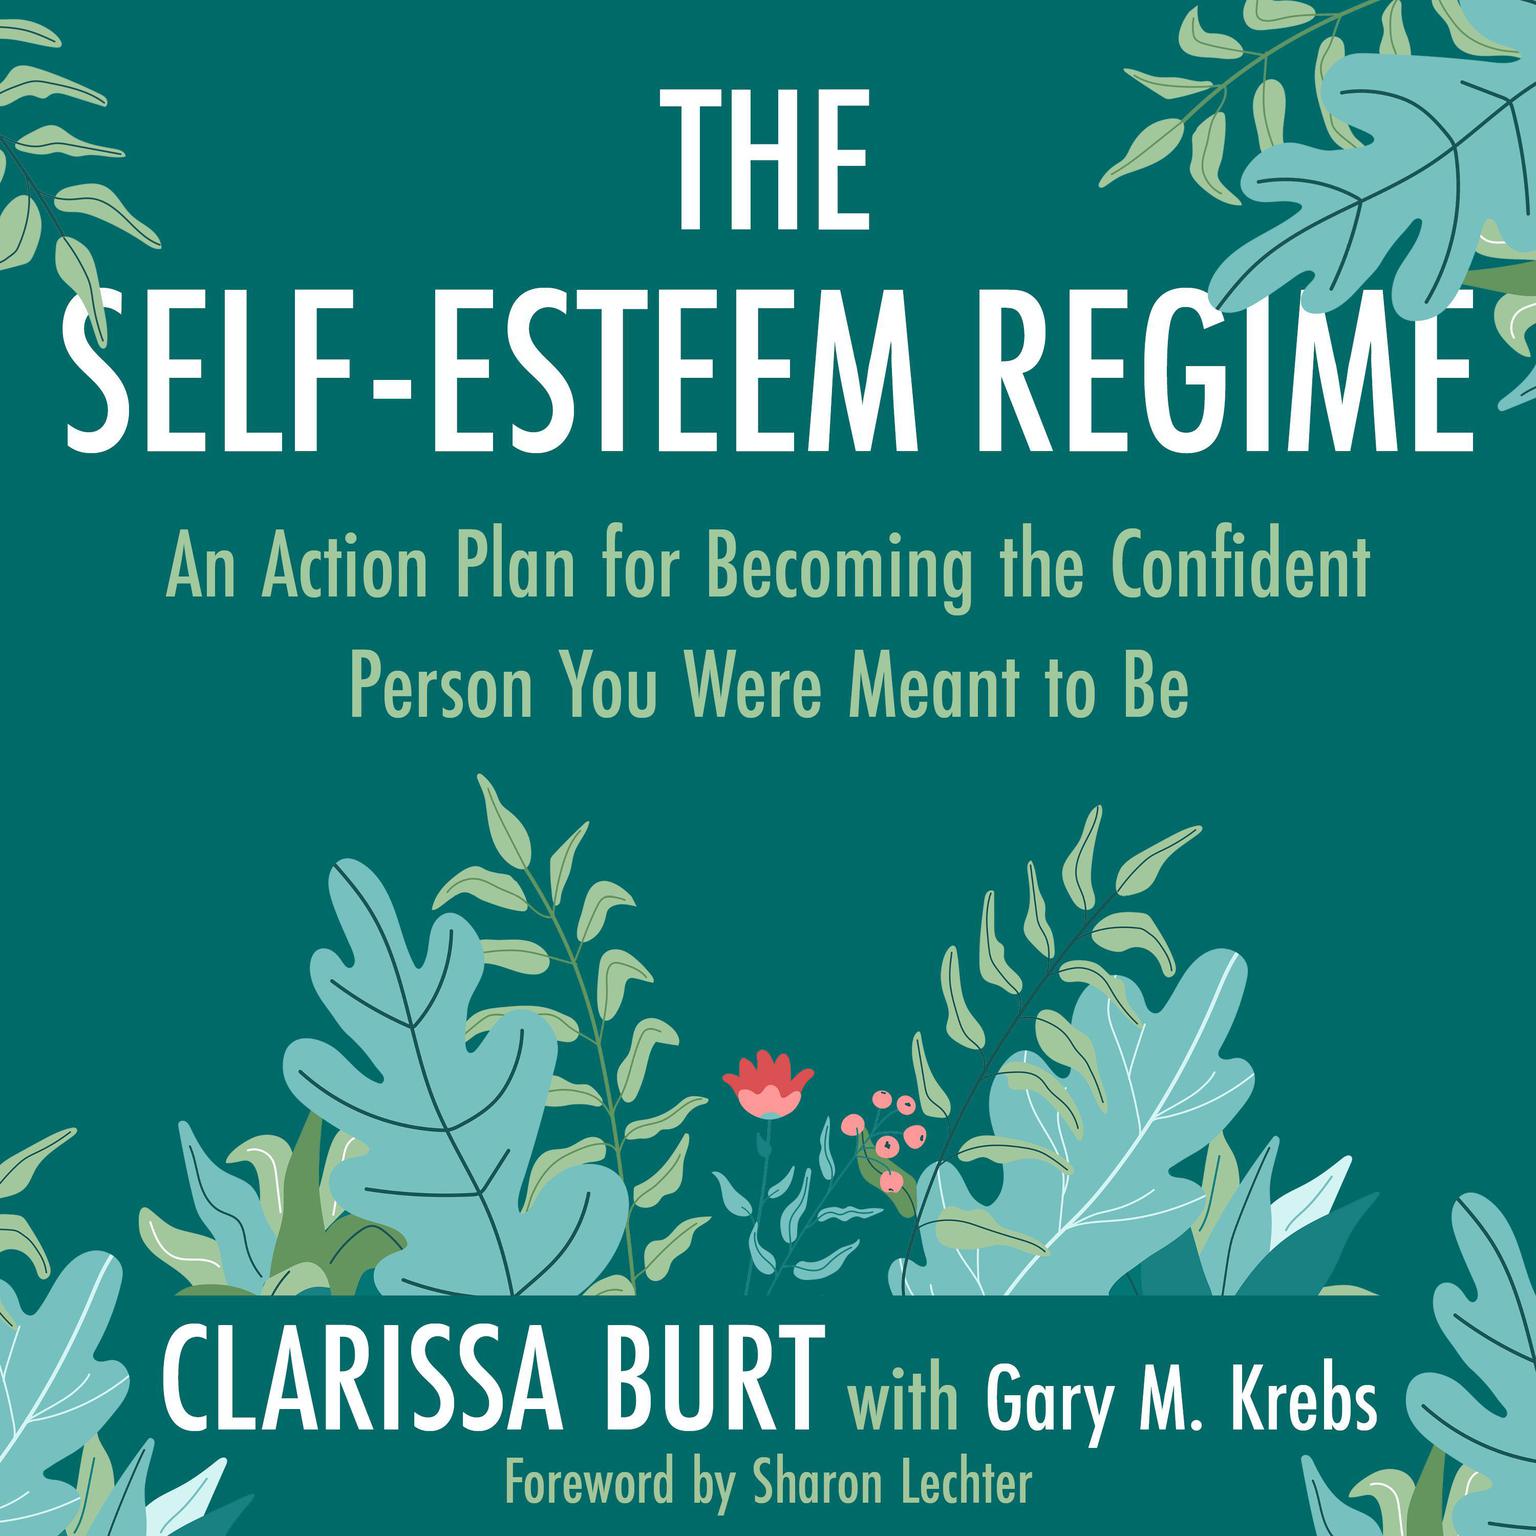 The Self-Esteem Regime: An Action Plan for Becoming the Confident Person You Were Meant to Be Audiobook, by Clarissa Burt